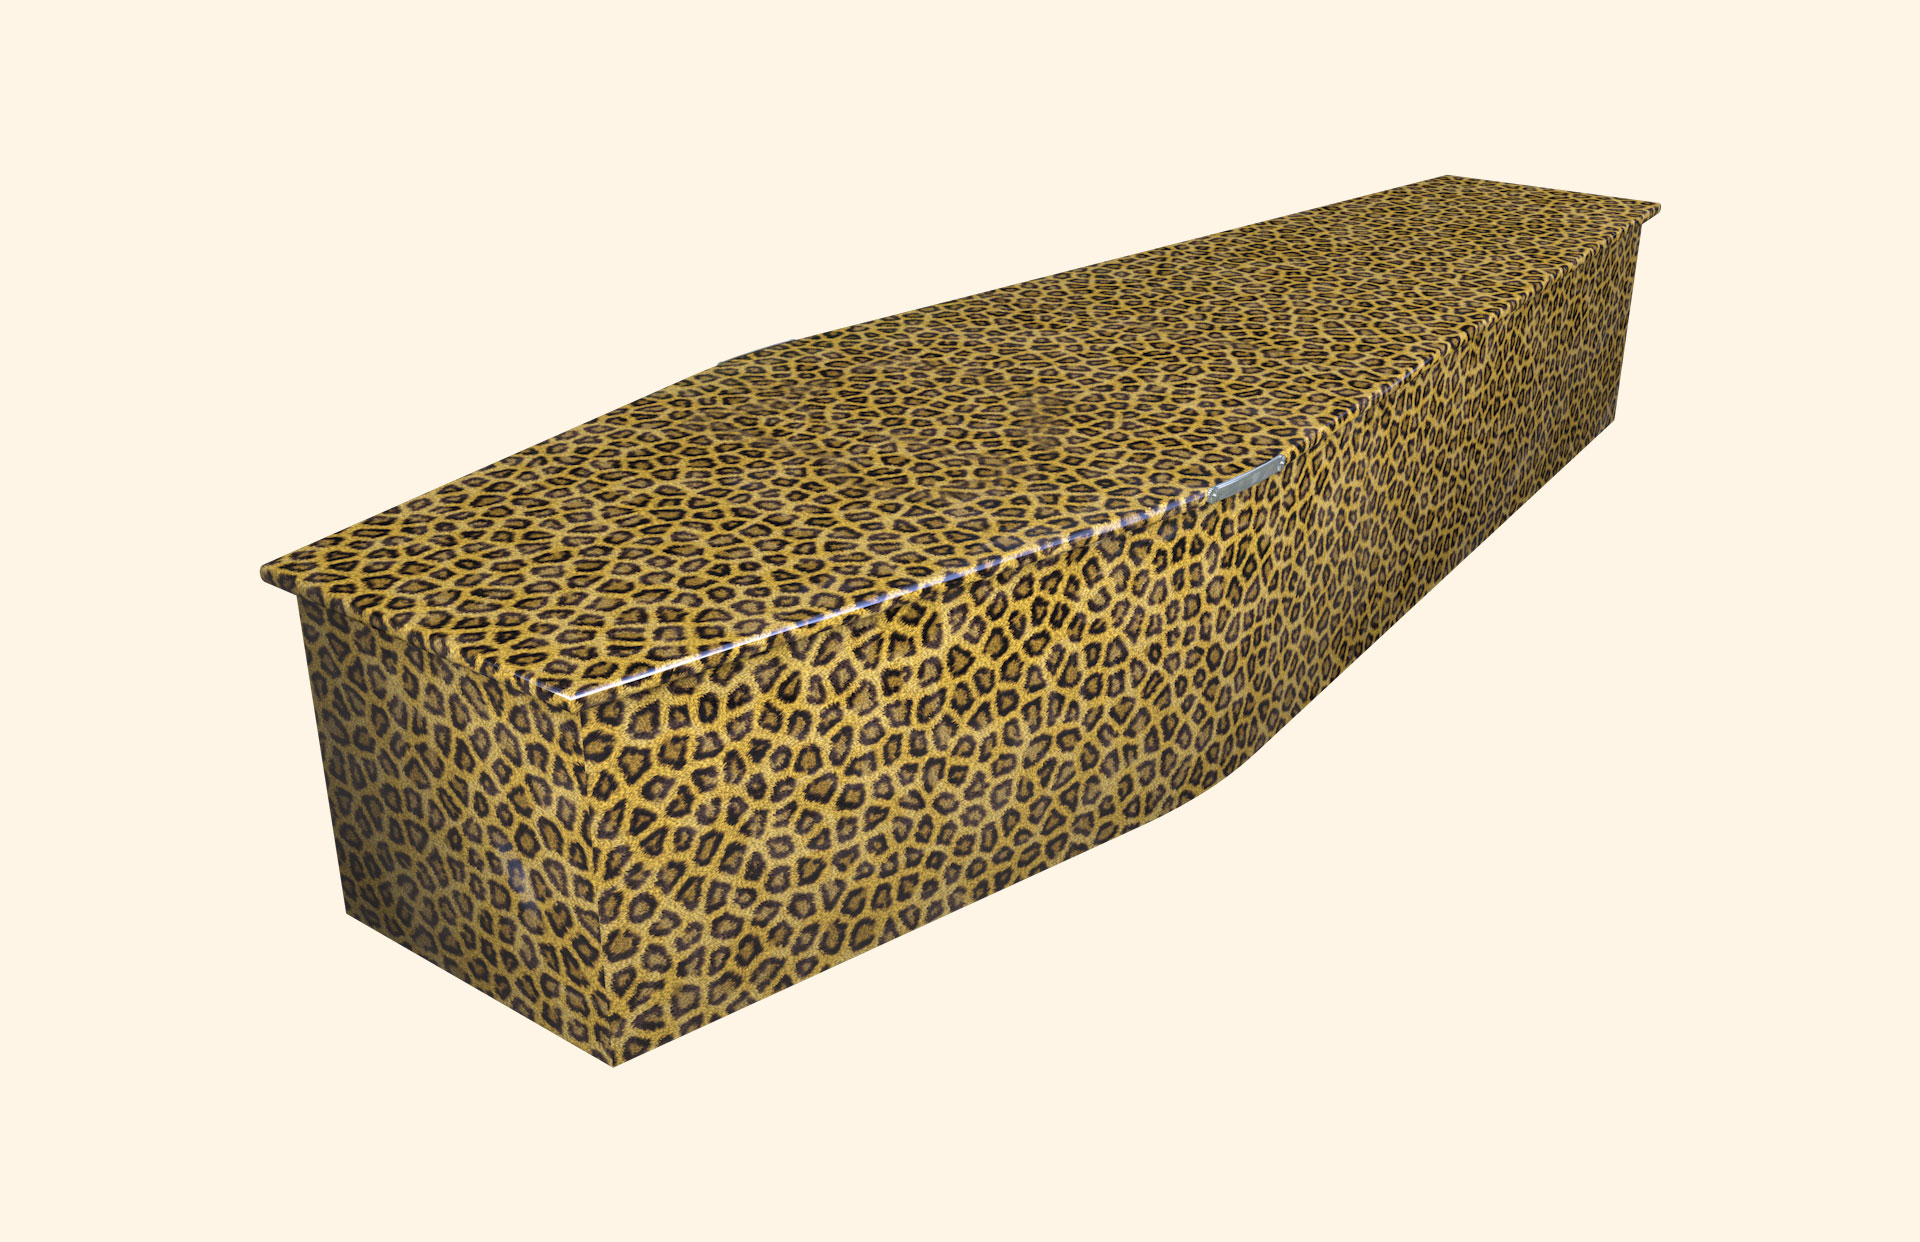 Leopard Skin design on a traditional coffin